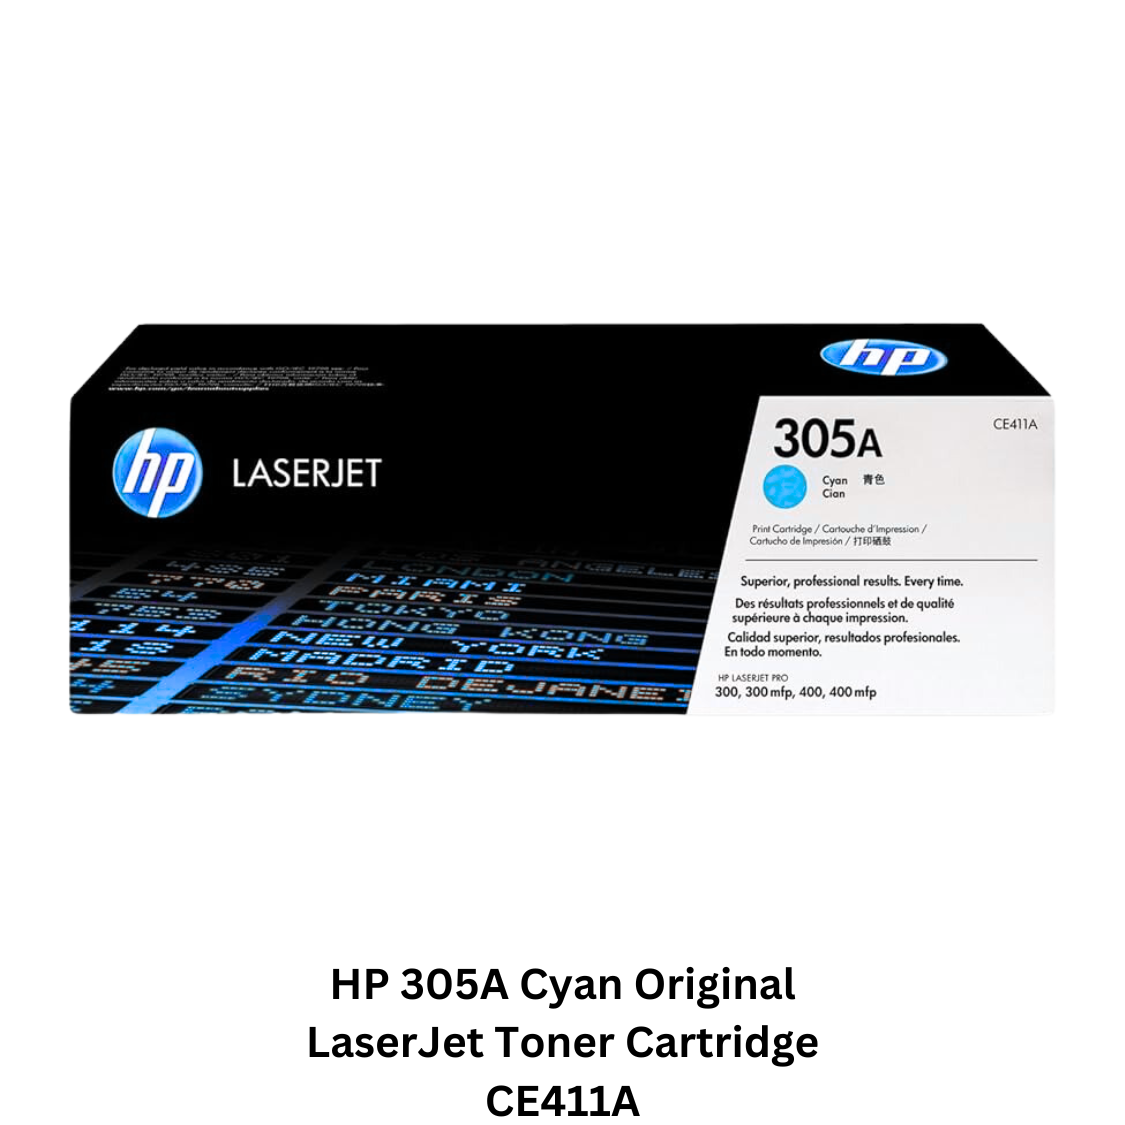 HP 305A Cyan Original LaserJet Toner Cartridge CE411A, providing consistent, vivid cyan prints for professional quality documents and graphics.